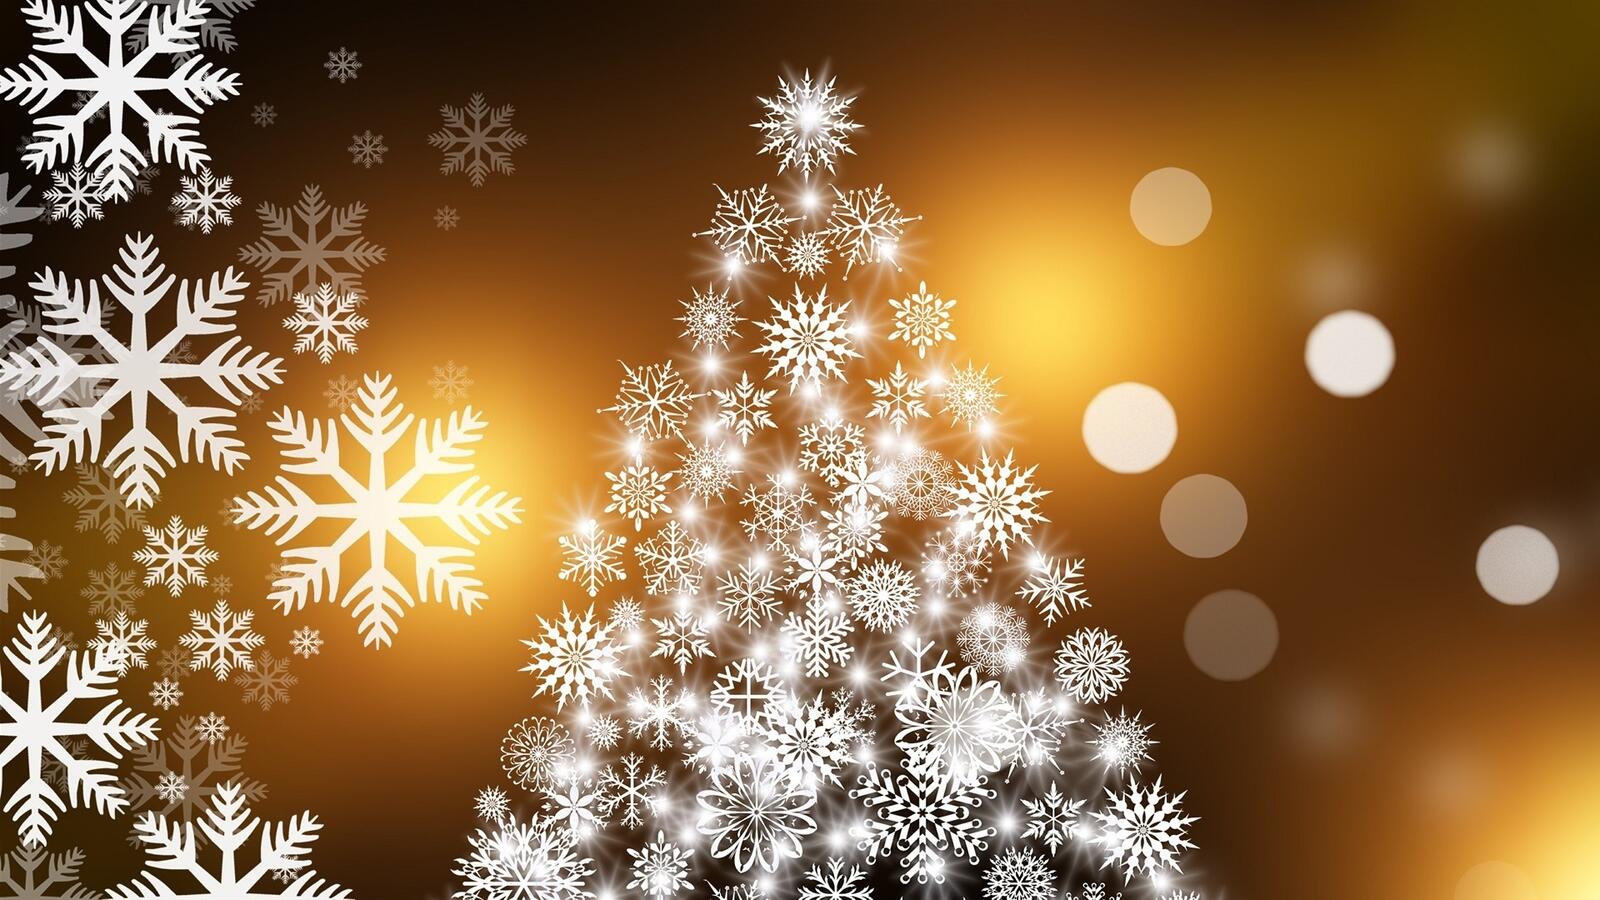 Wallpapers snowflakes holiday atmosphere new year decorations on the desktop